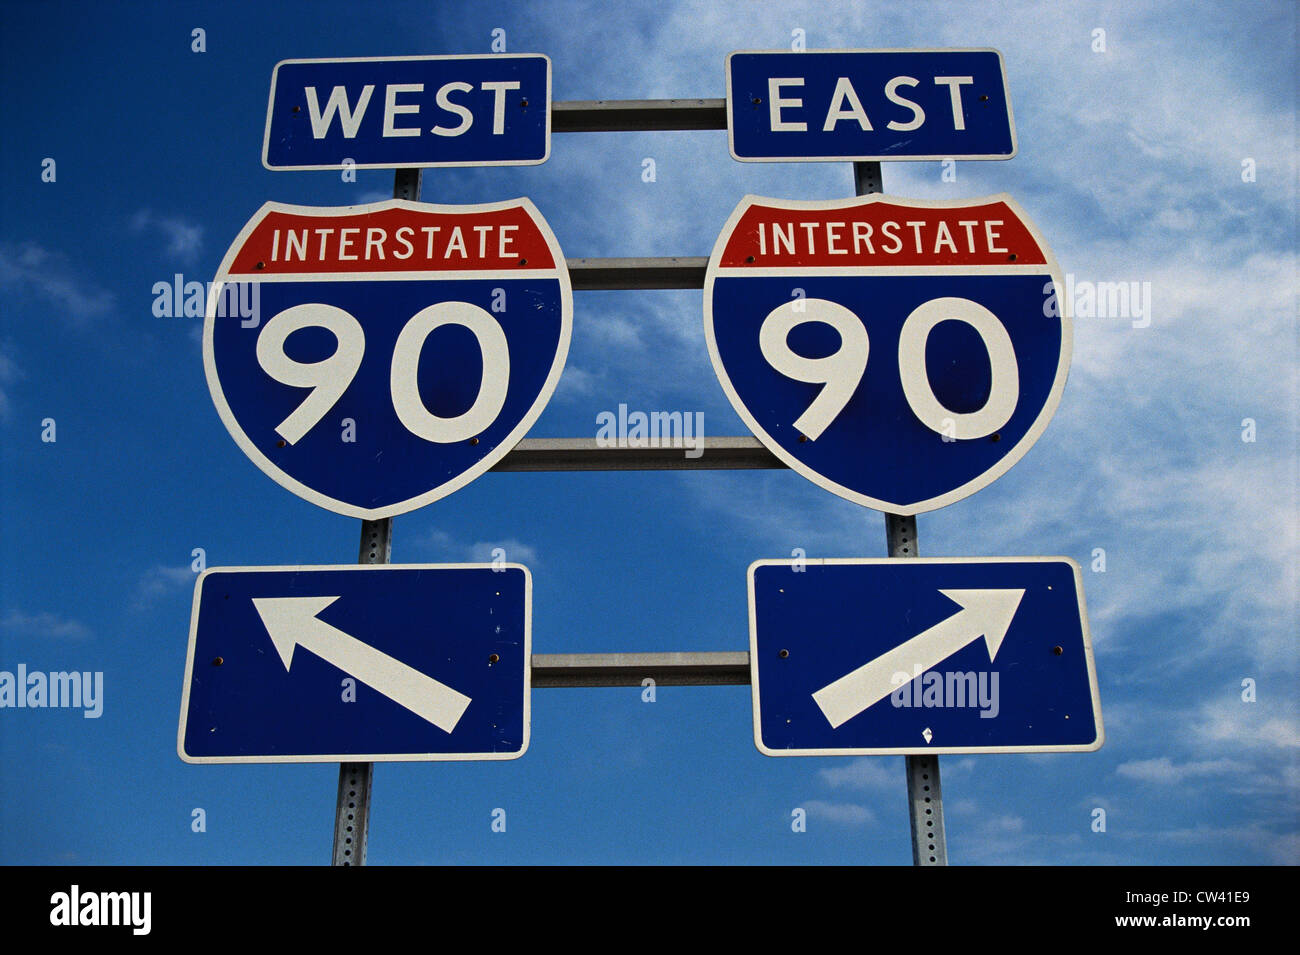 This road sign on New York State Freeway. It points out direction for Route 90 to go east or west. signs are blue red and white Stock Photo